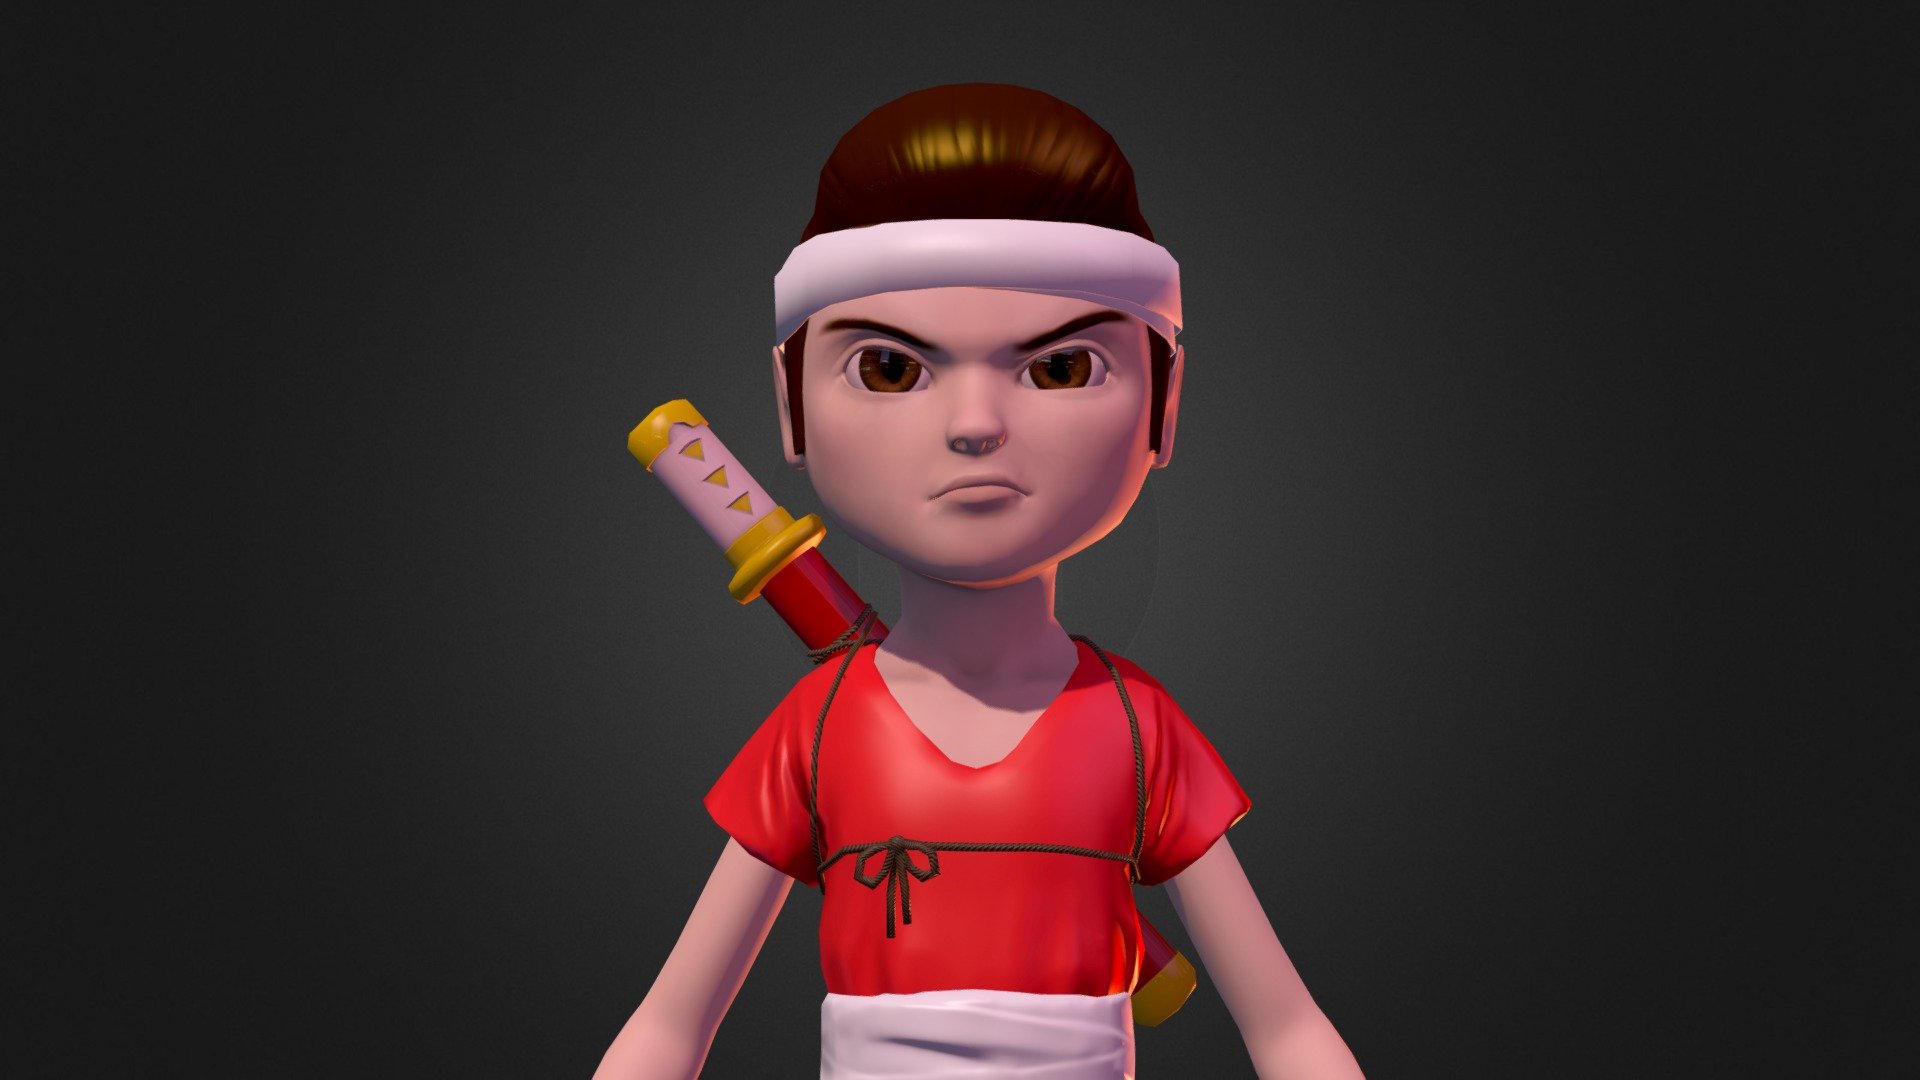 More about this model, renders and process of creation here:
https://www.behance.net/gallery/29973155/Ataru-the-ninja - Ataru the ninja - 3D model by danielperezdominguez 3d model